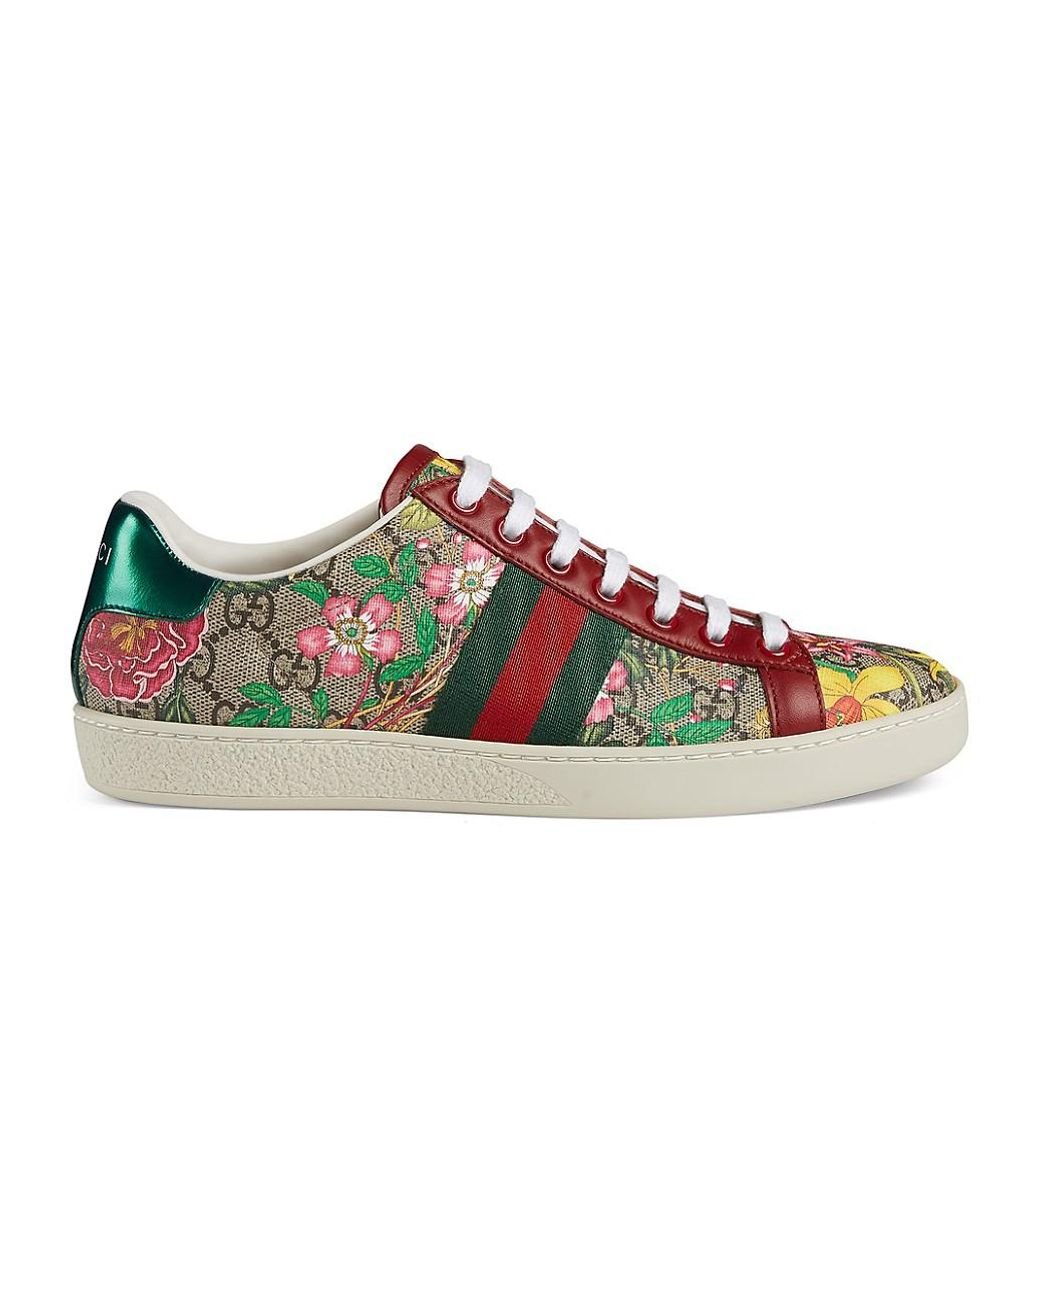 Gucci Ace GG Floral Sneakers | Lyst